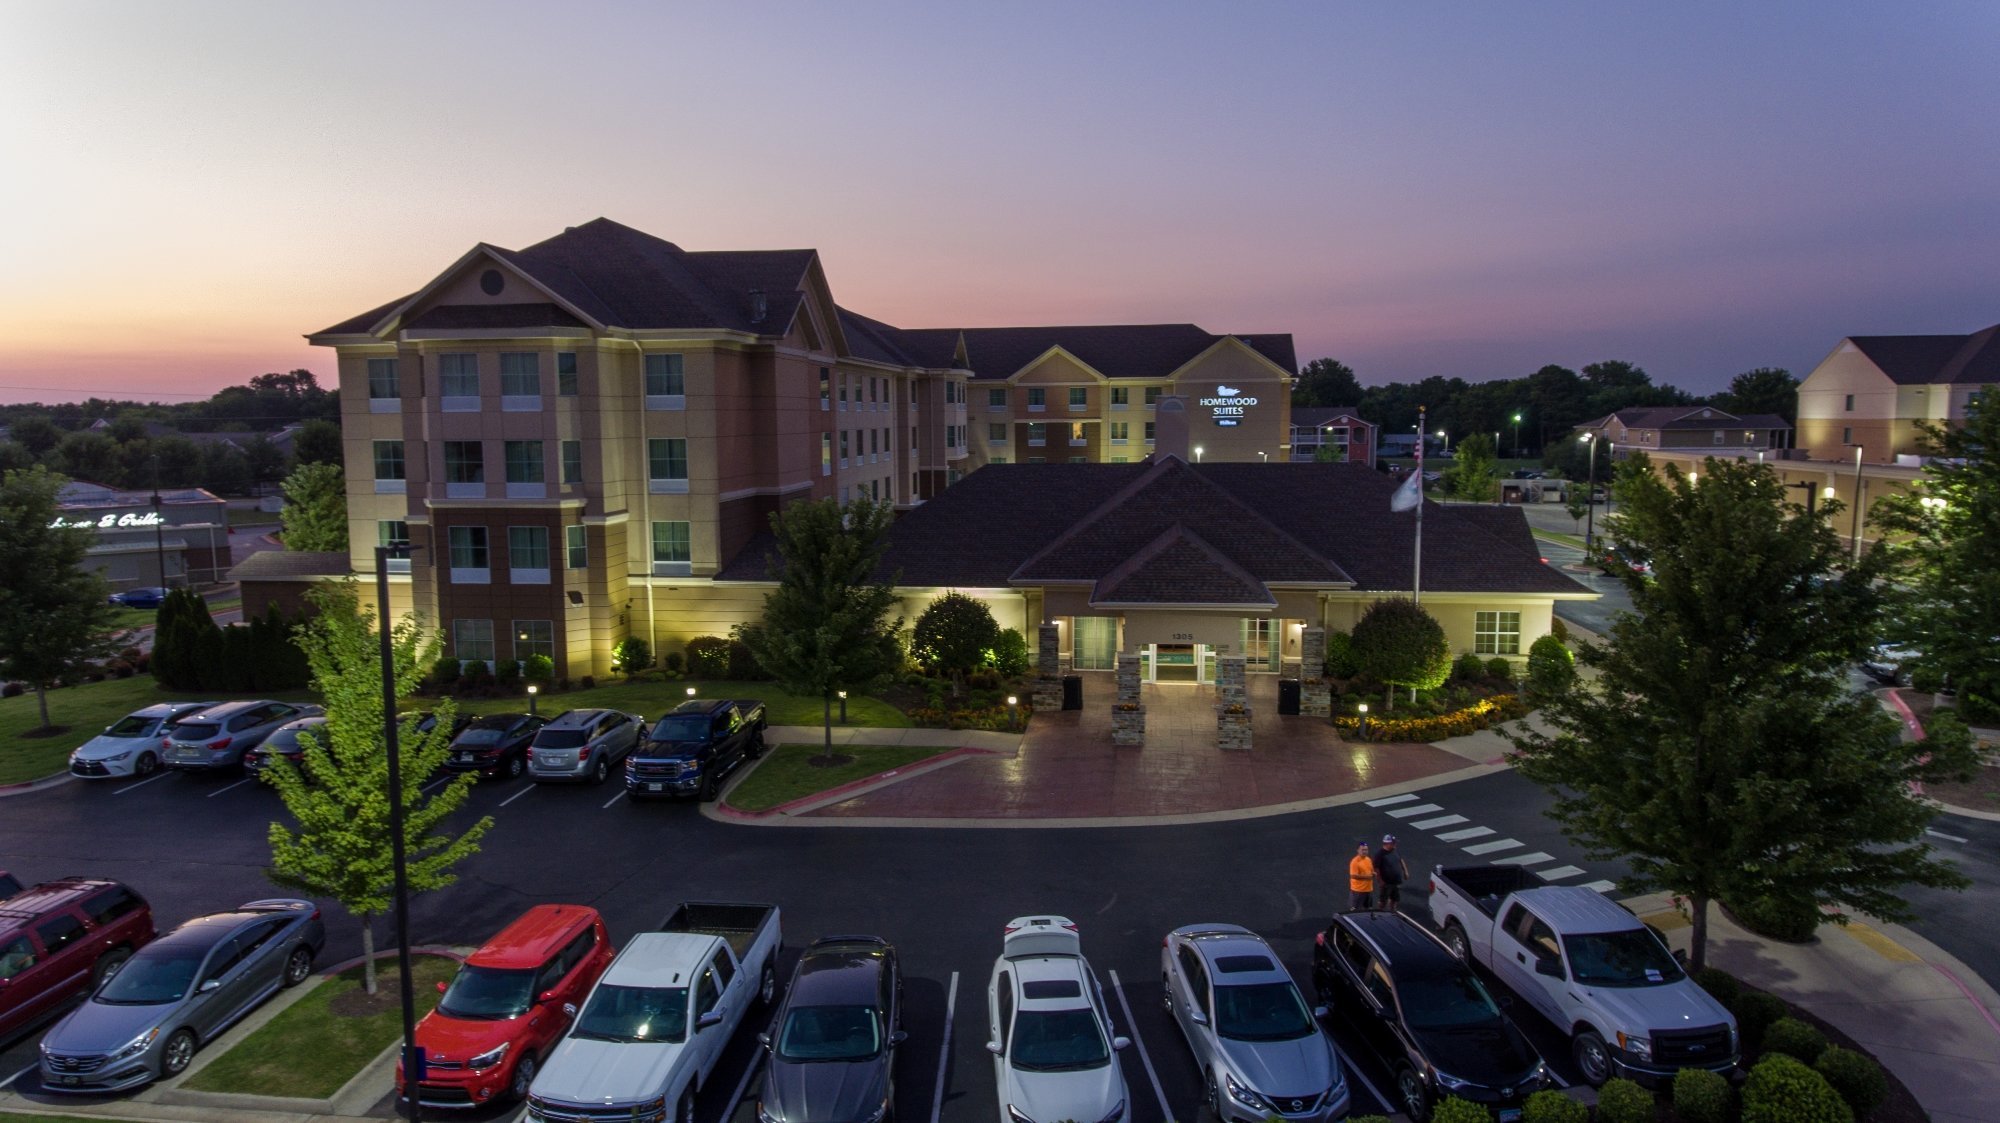 Photo of Homewood Suites by Hilton Fayetteville, Fayetteville, NC